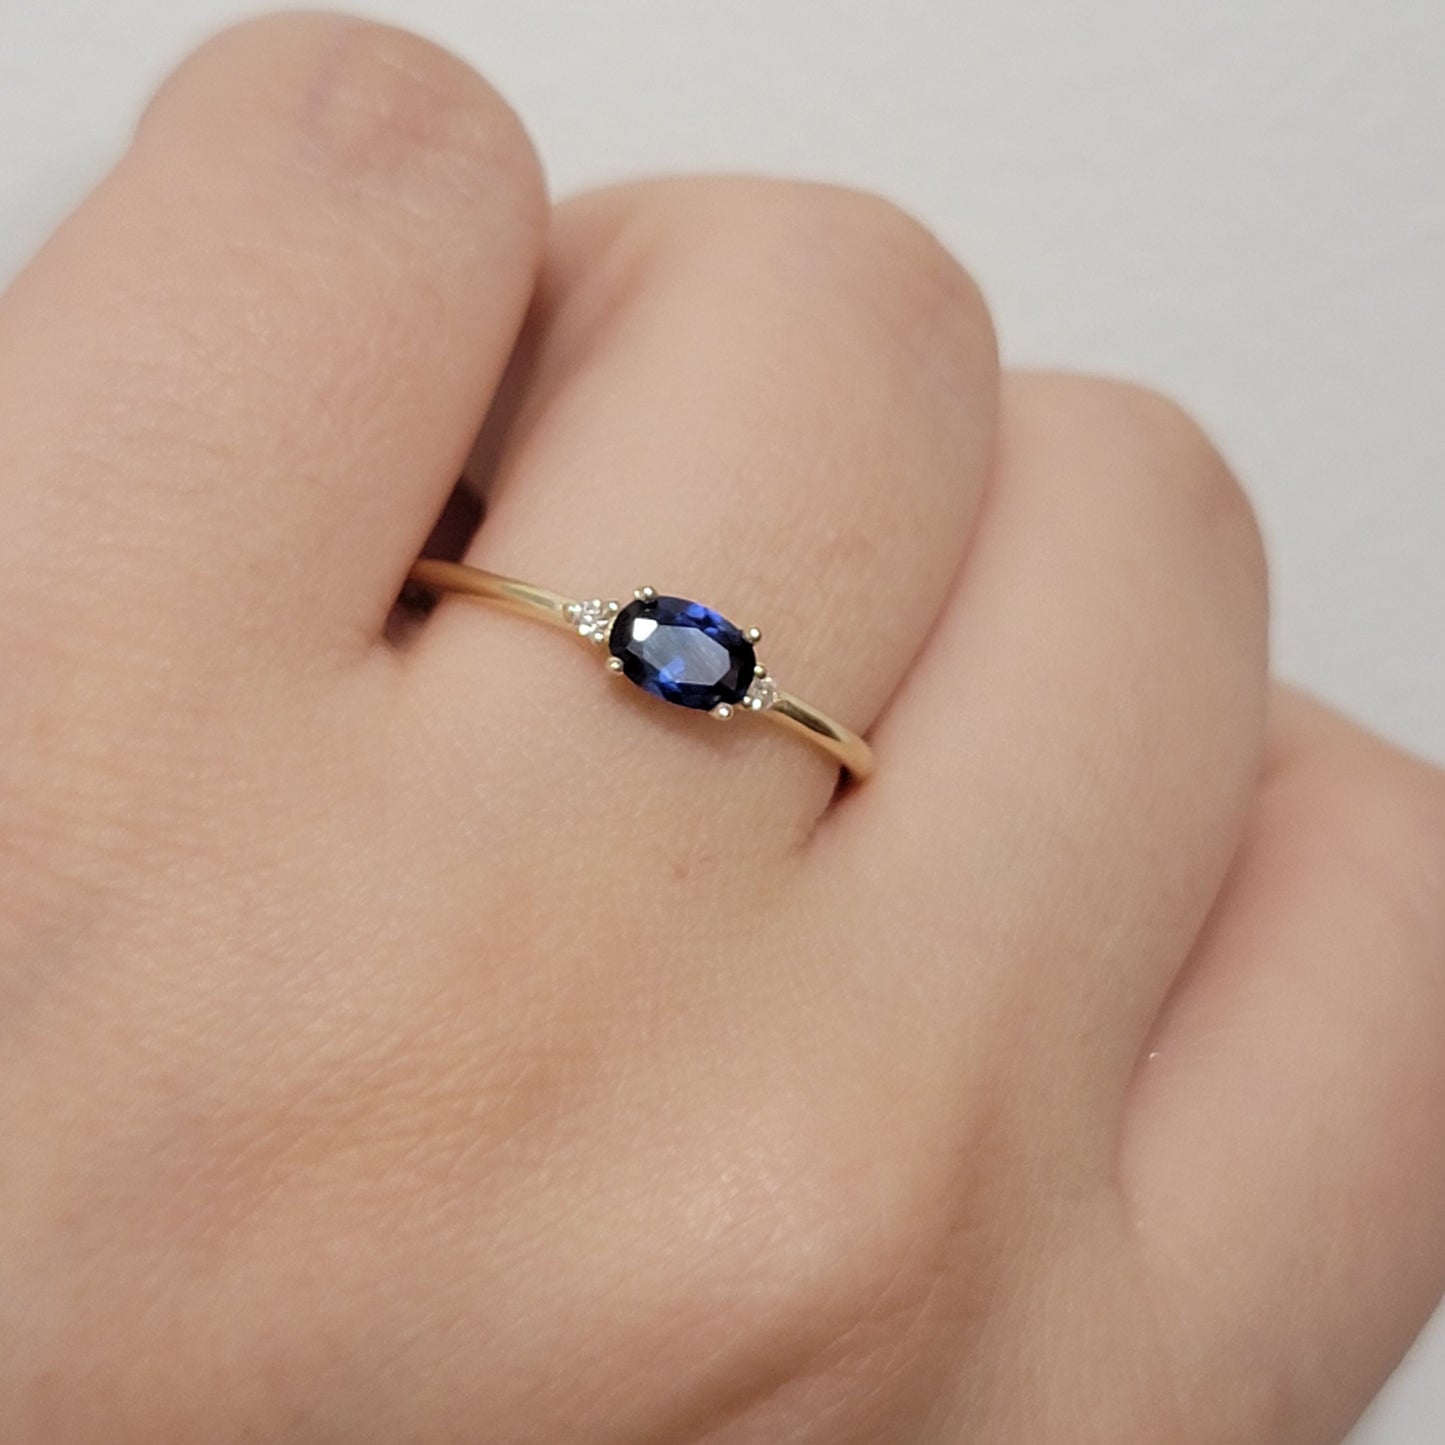 Oval Cut Blue Sapphire And Diamond Engagement Ring, 14K Vintage Solitaire Sapphire Ring, Three Stone Engagement Ring, Anniversary Gift